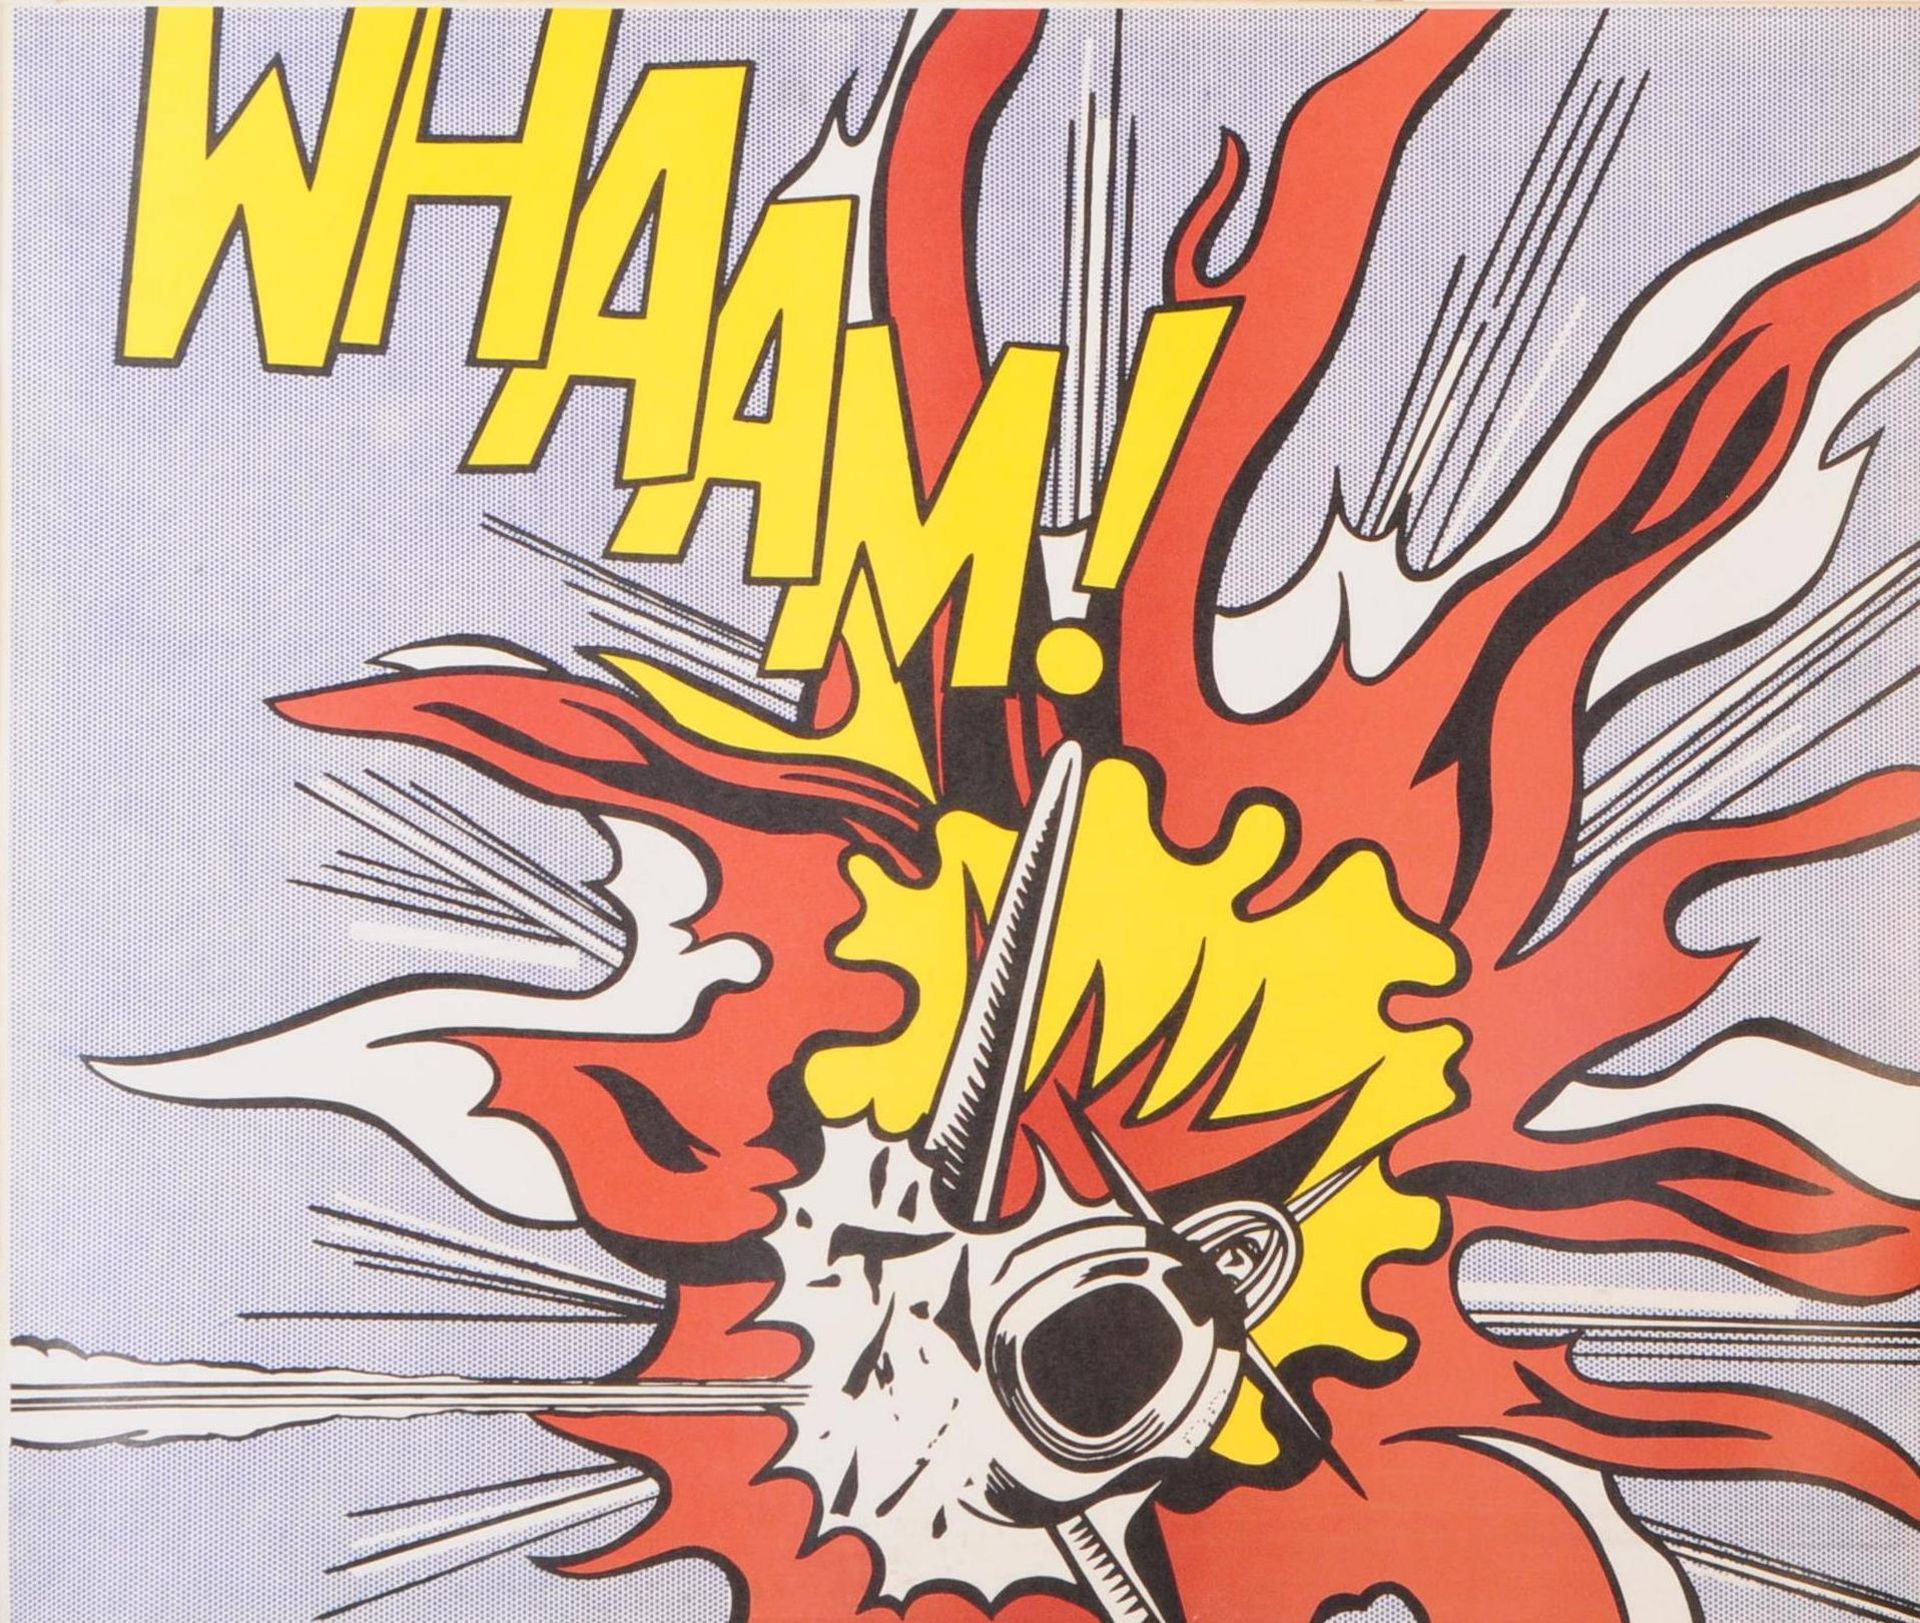 ROY LICHTENSTEIN WHAAM! PRINT - PUBLISHED BY TATE GALLERY - Image 6 of 8